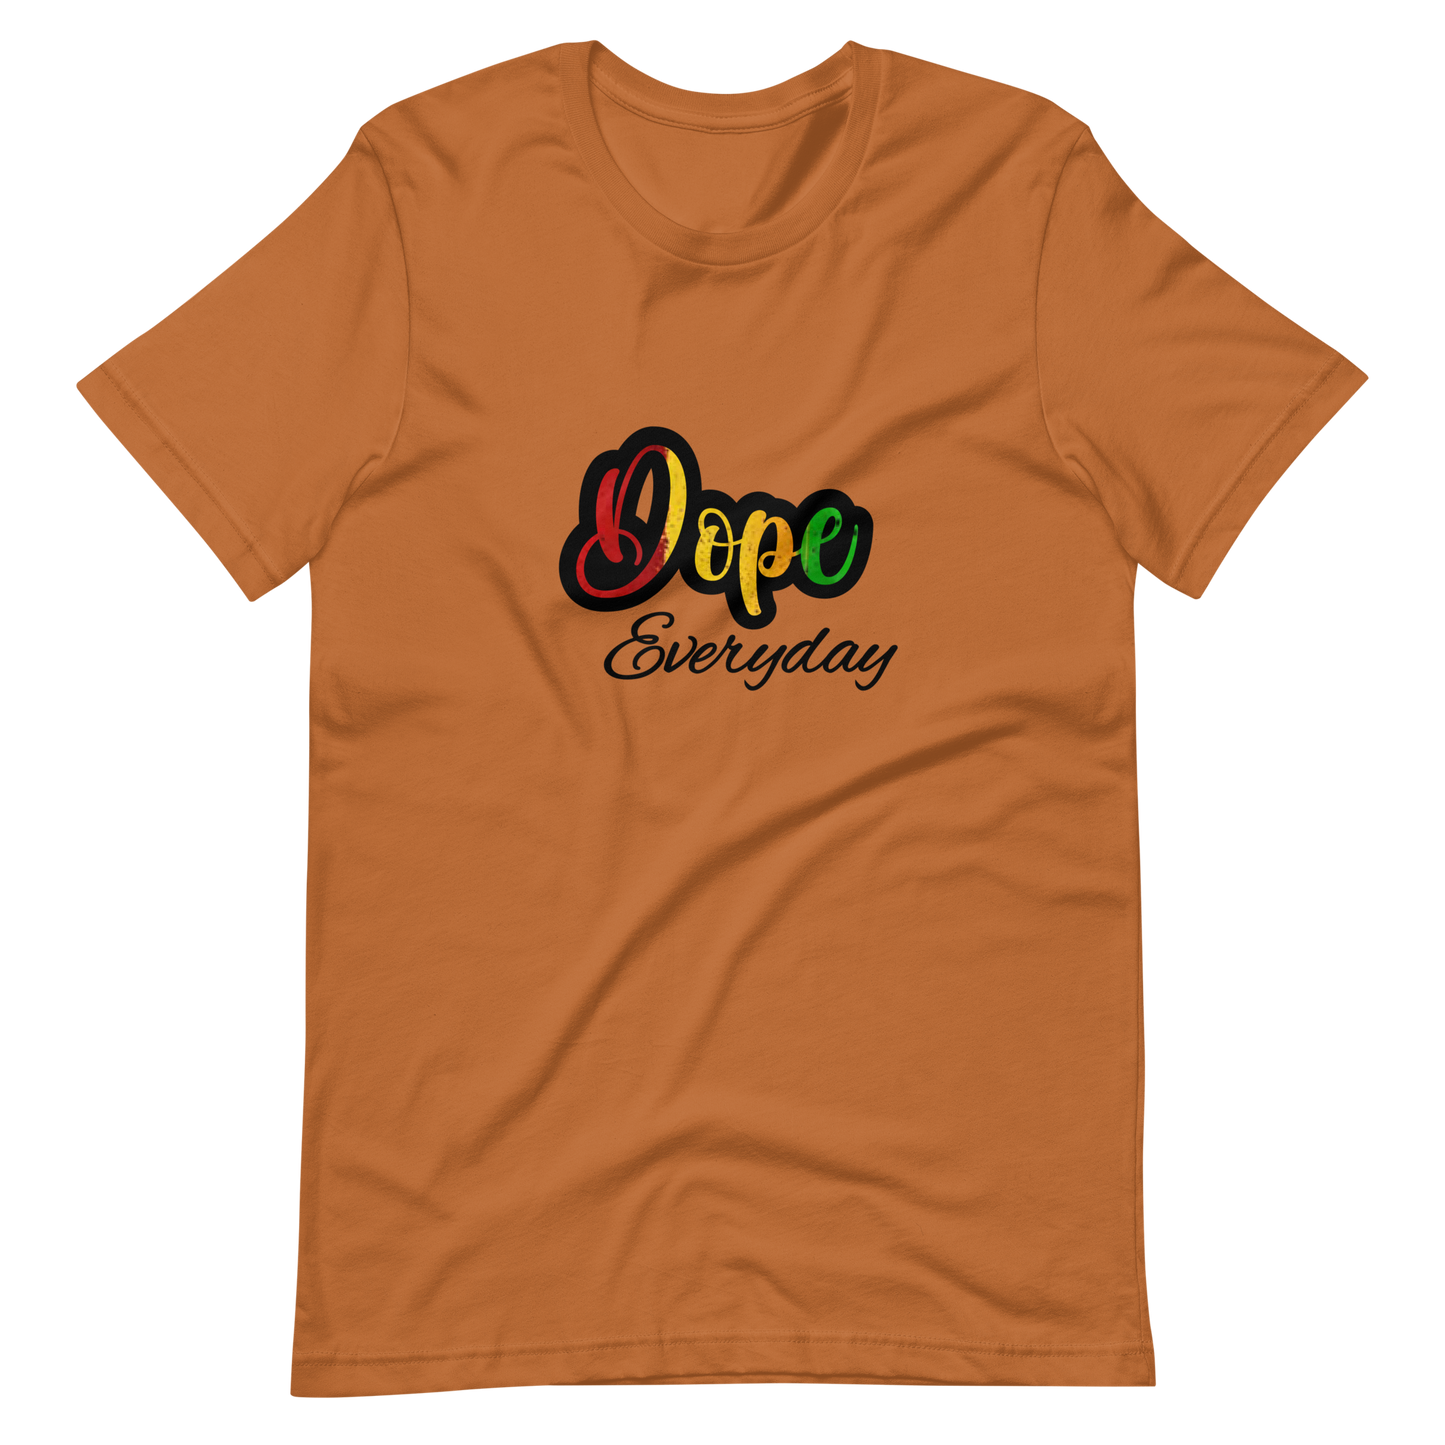 DOPE EVERYDAY Limited Edition